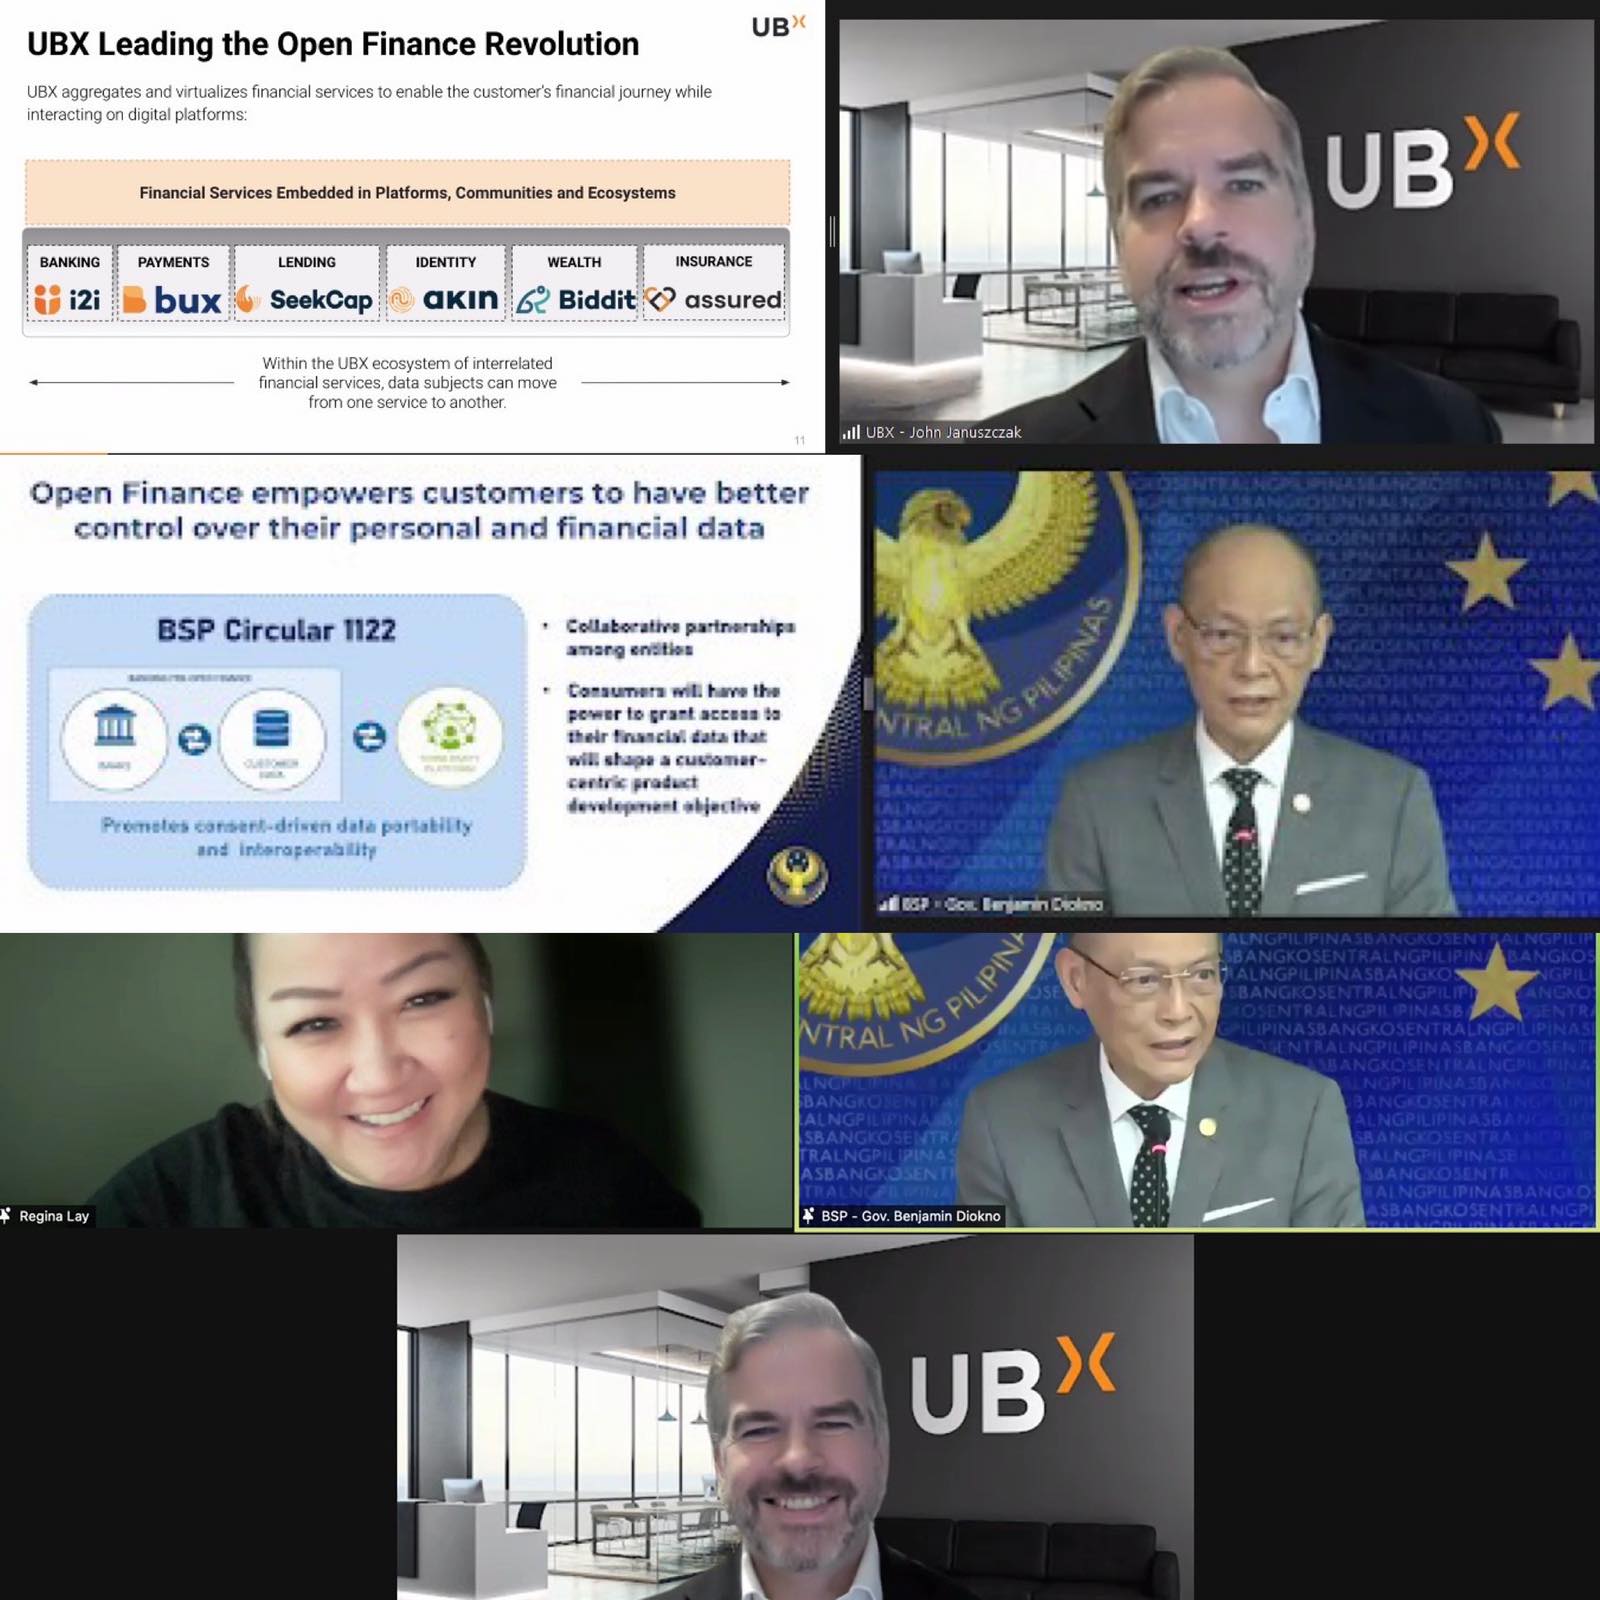 UBX leads BSP’s financial inclusion push through first-in-industry open finance platforms